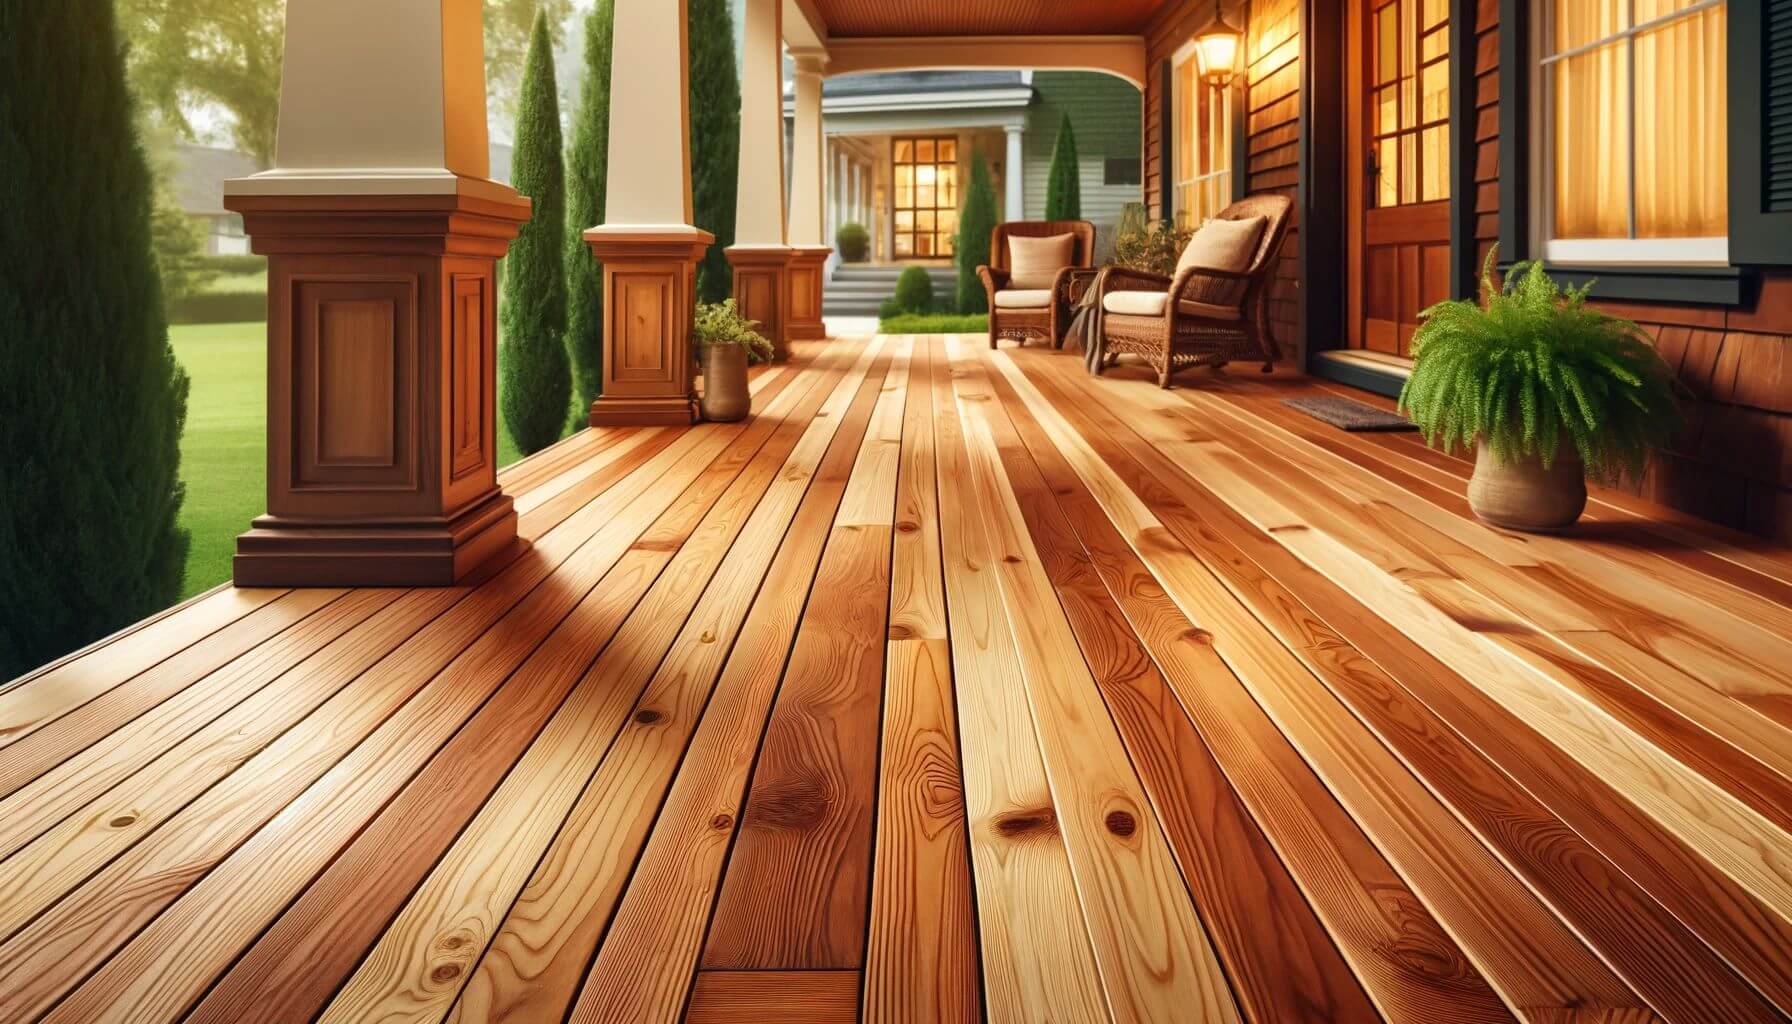 A beautifully maintained wooden porch floor made from cedar, pine, and redwood